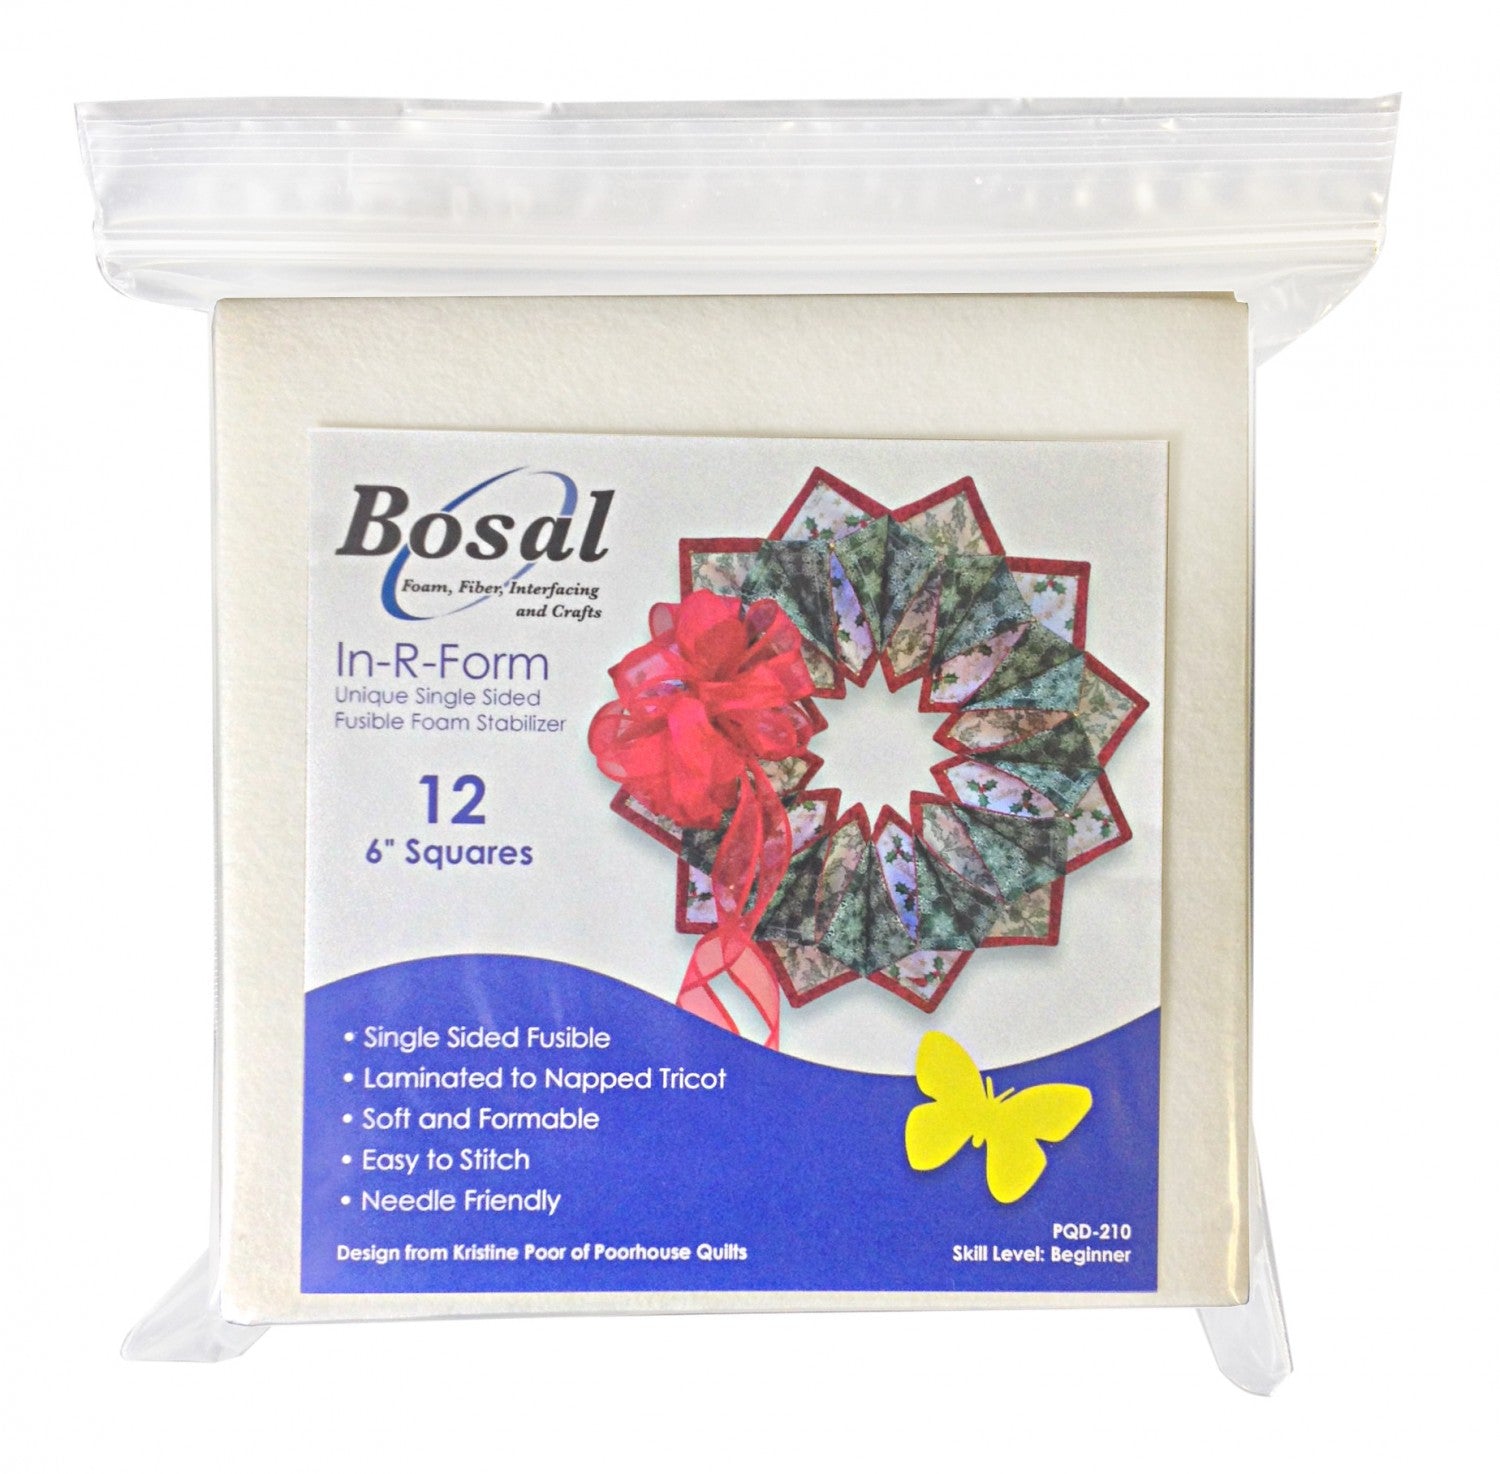 In-R-Form Plus Single-Sided Fusible Stabilizer 6-Inches x 6-Inches 12-Pack by Bosal Foam and Fiber